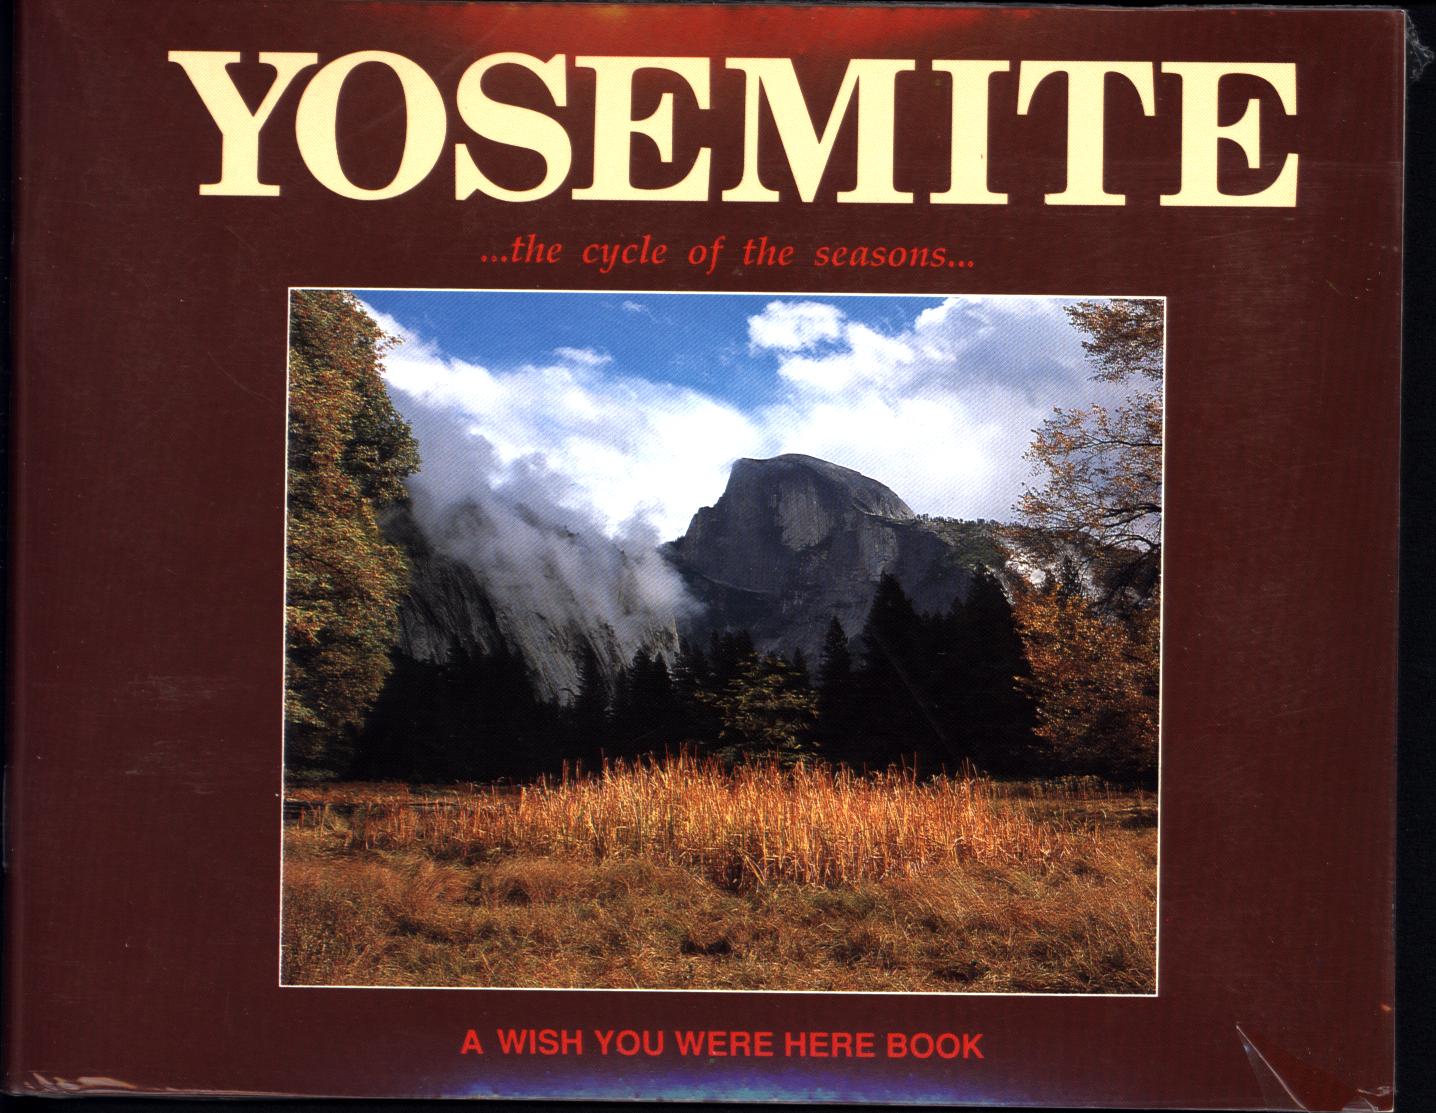 YOSEMITE...THE CYCLE OF THE SEASONS: A Wish You Were Here Book.